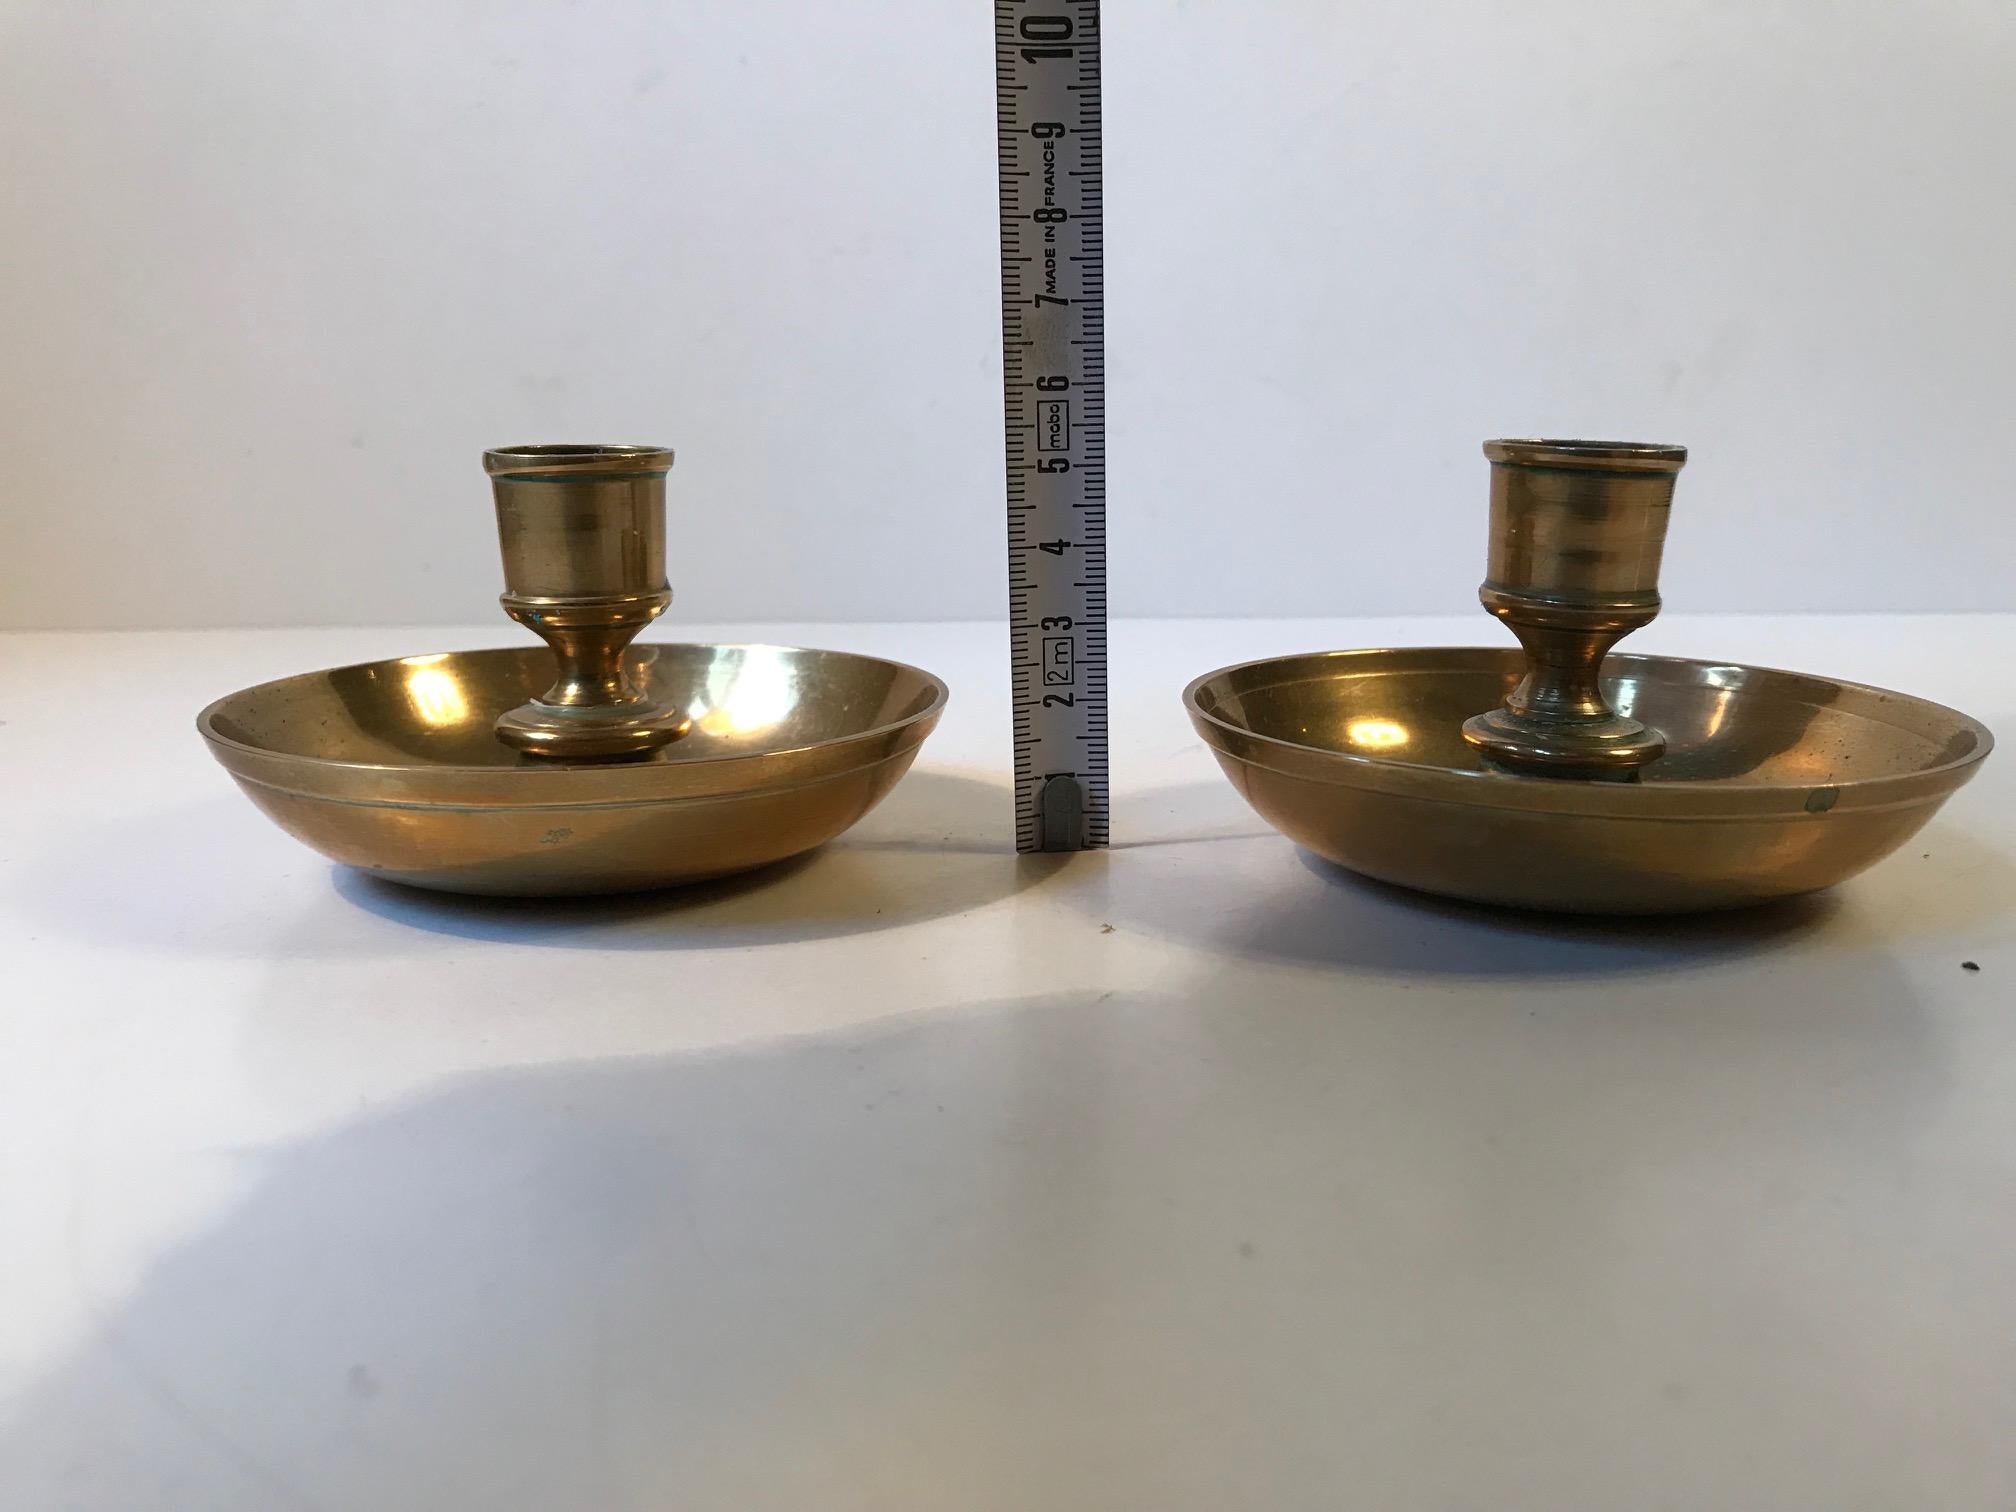 Early 19th Century Antique Officer's Campaign, Travel Candlesticks in Brass, circa 1800